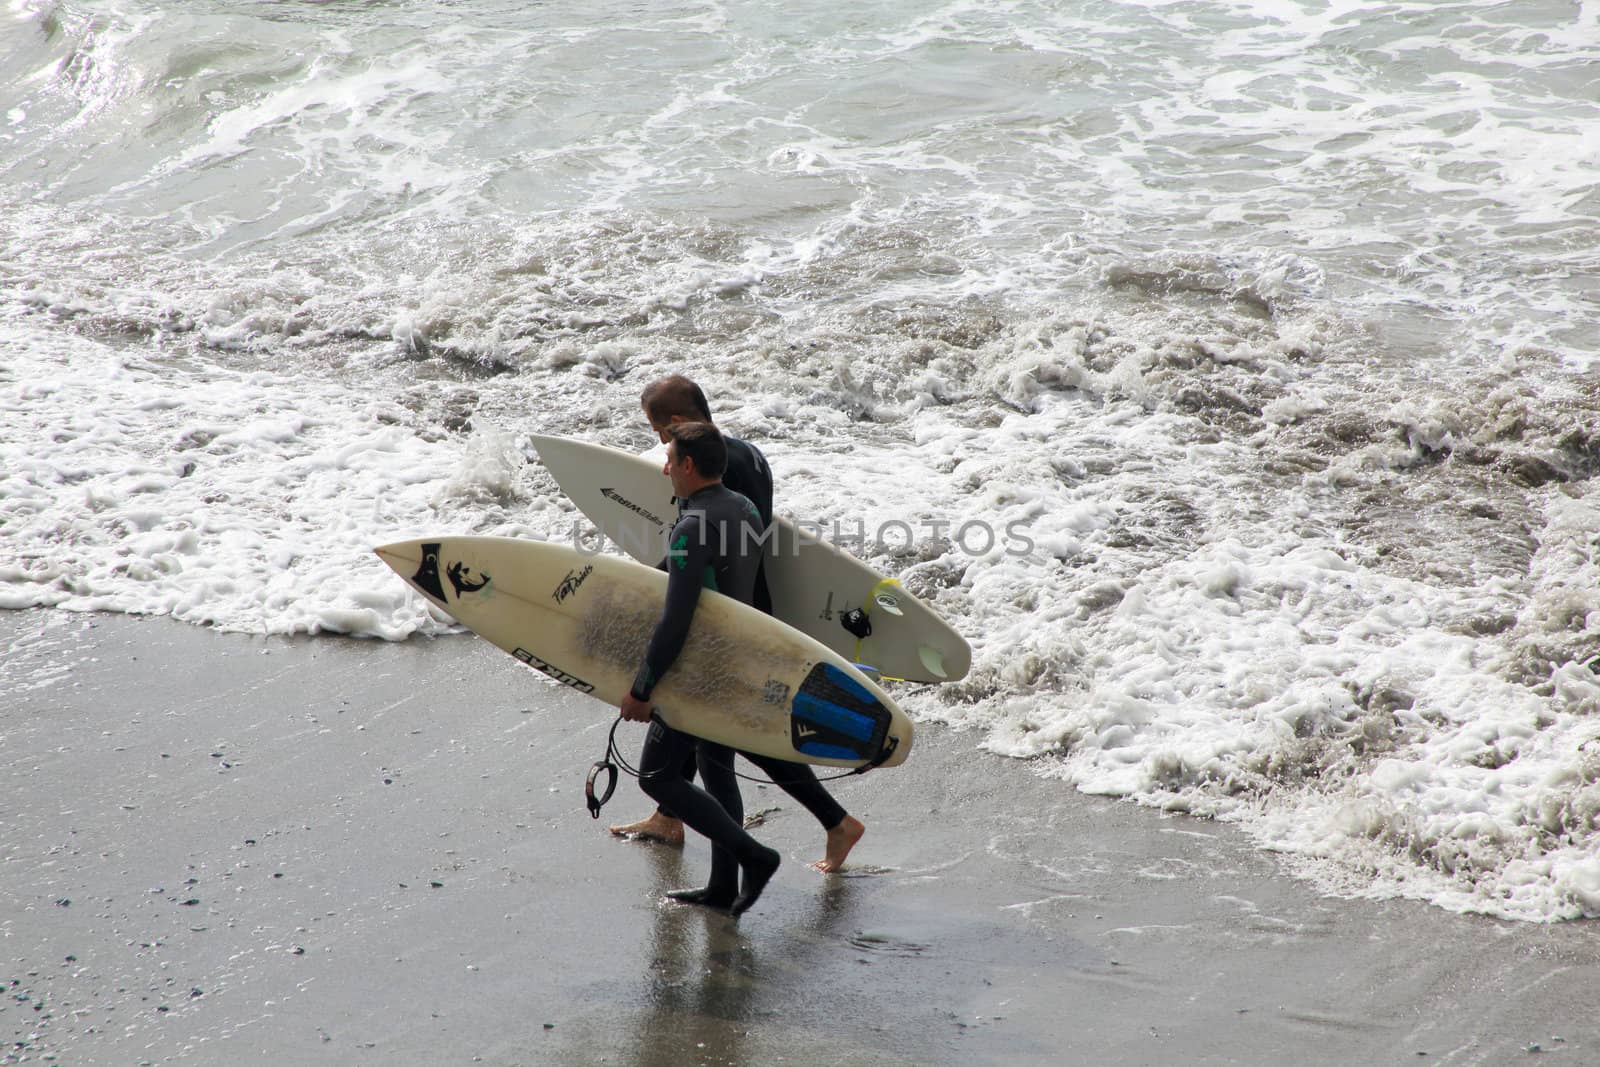 Surfing in Levanto, opening the performances season by adrianocastelli